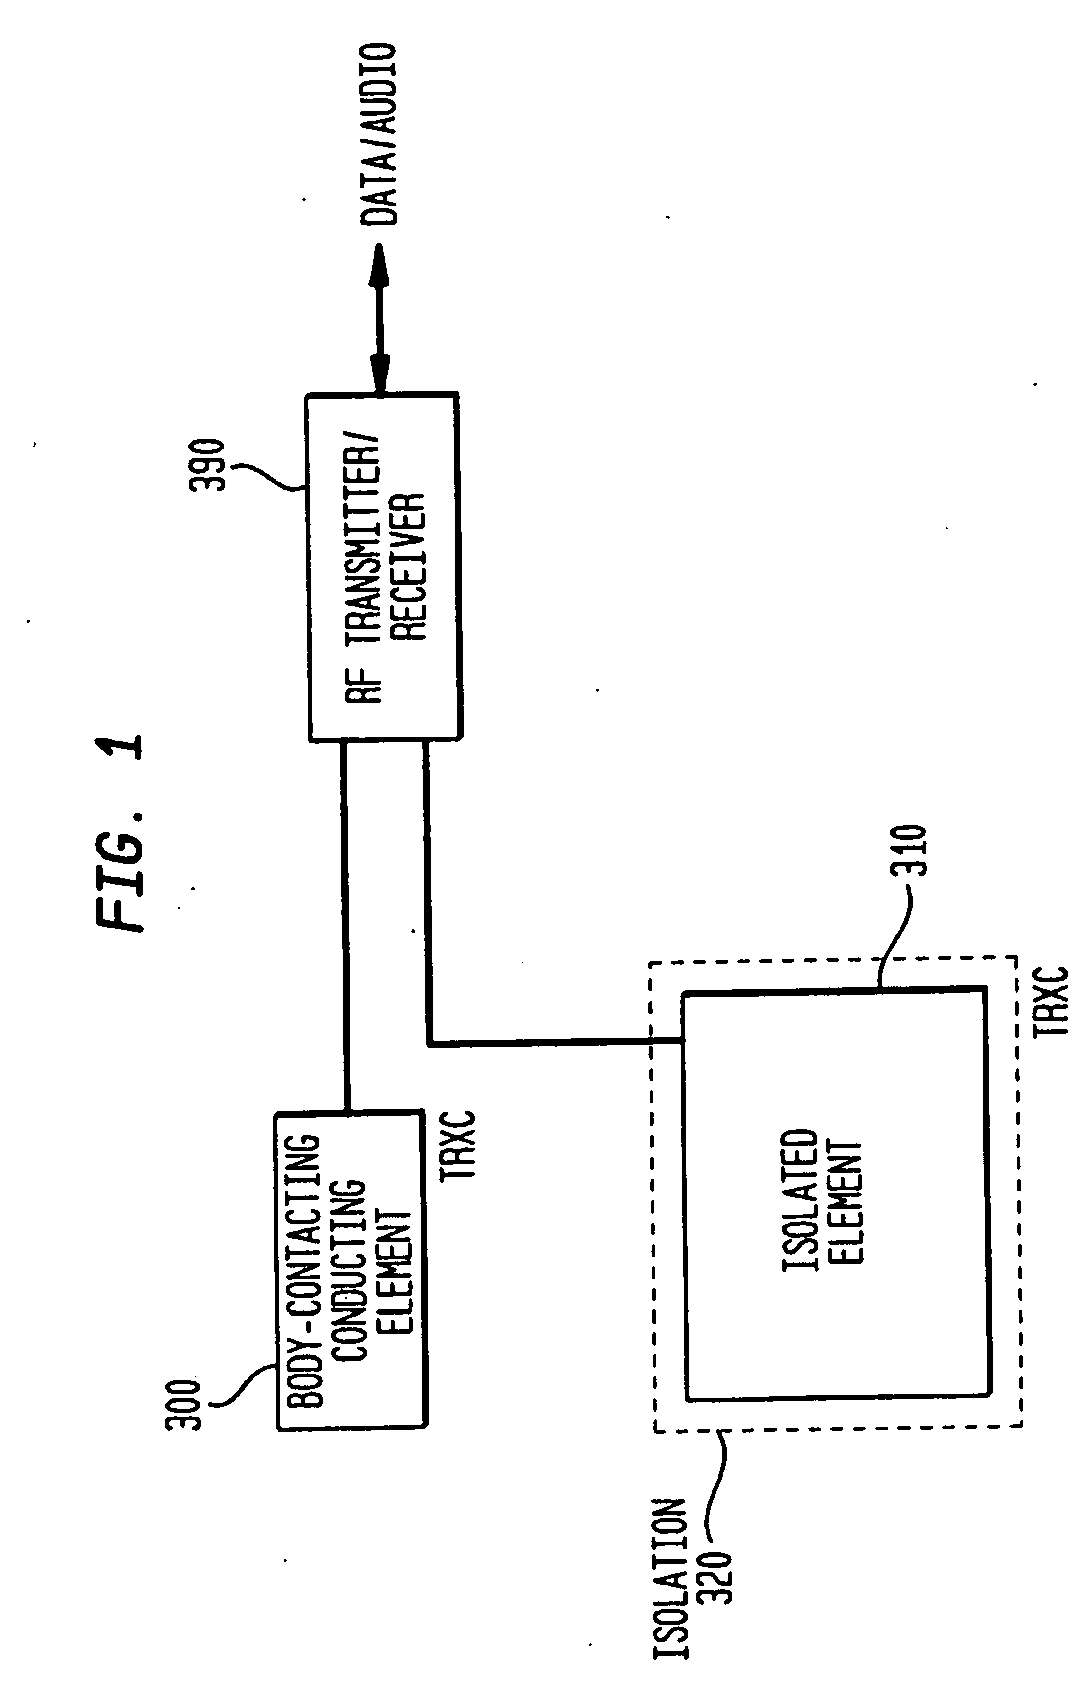 Short range communications for body contacting devices